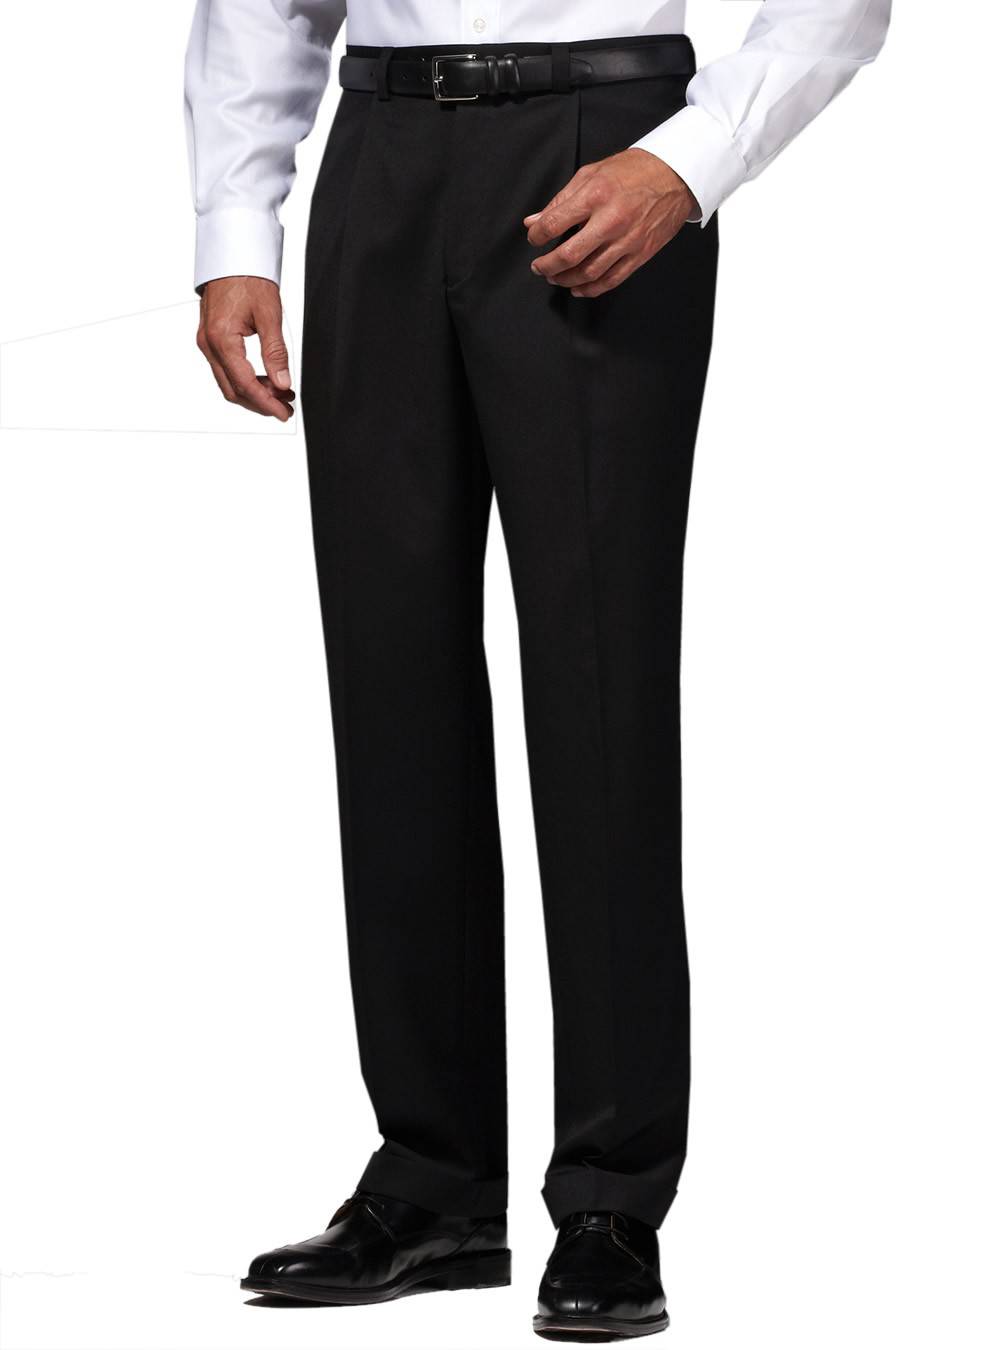 Blogs About The Kinds Of Men's Suits At Fashionsuitoutlet. - WINTER ...